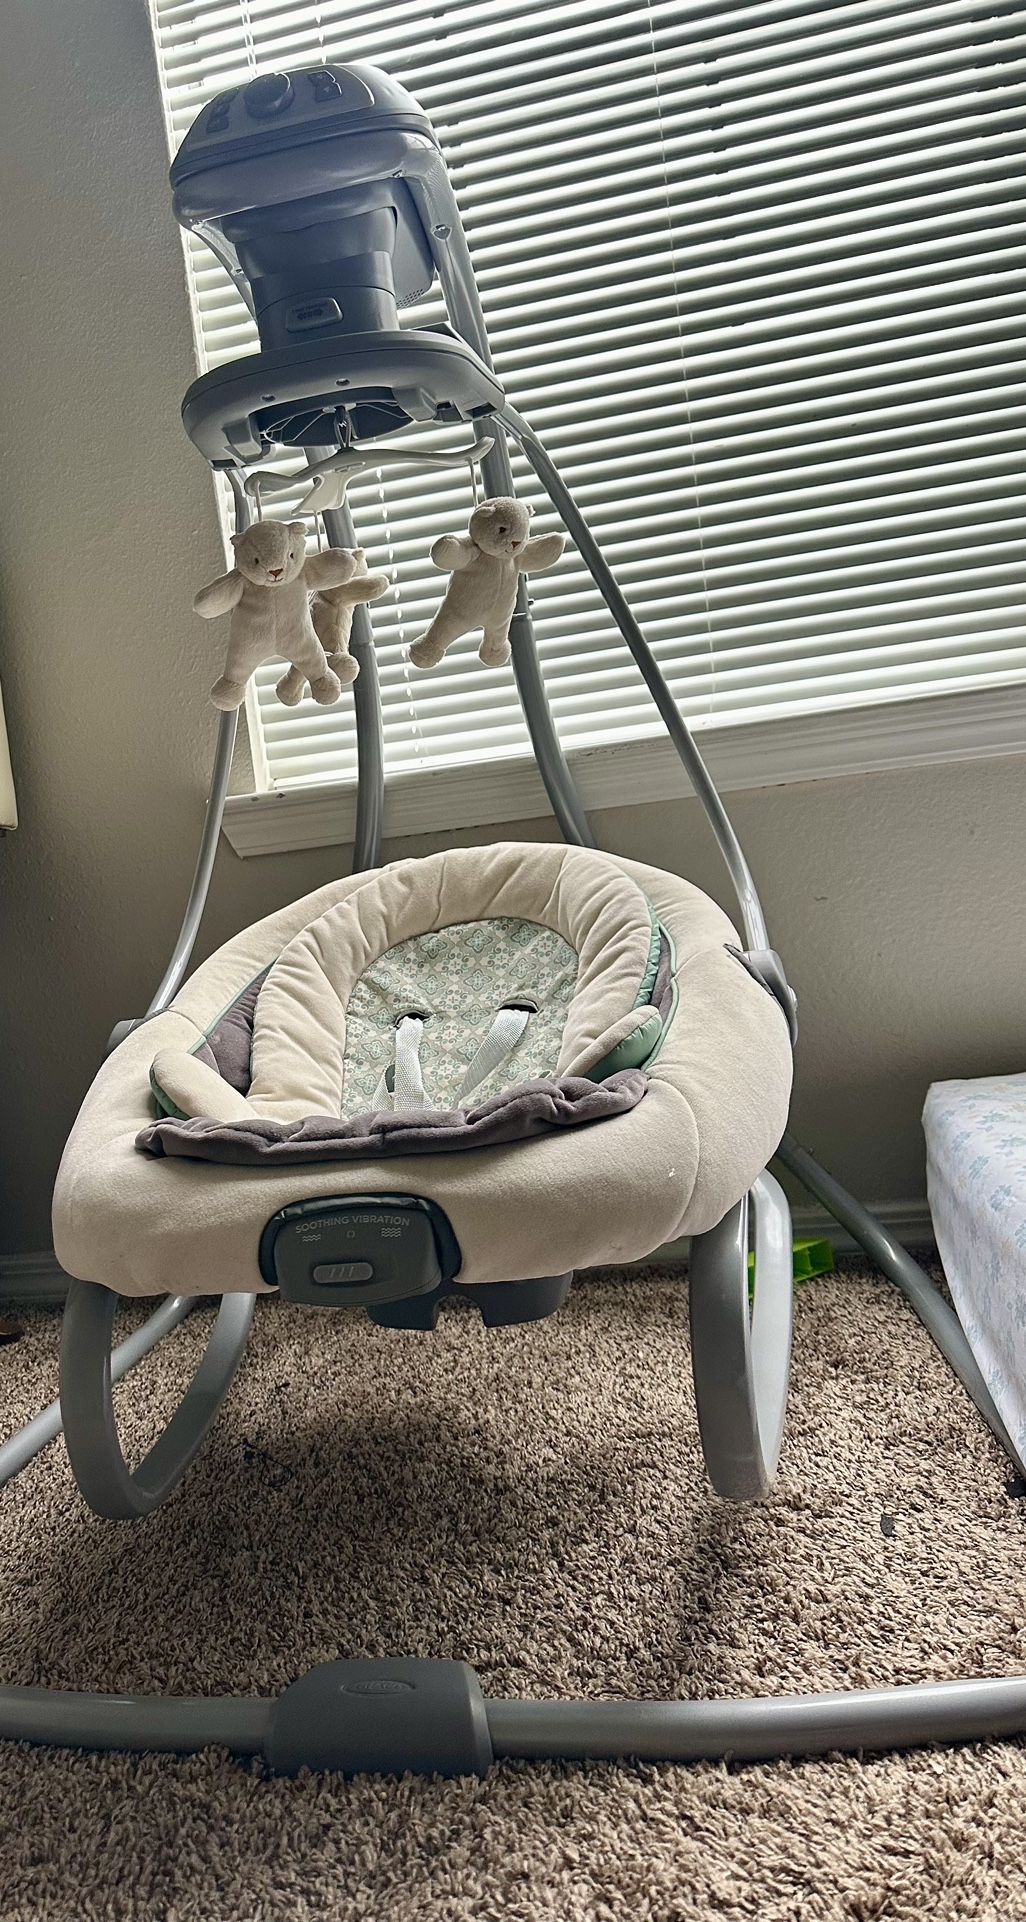 Graco Dual Connect Child Swing $95